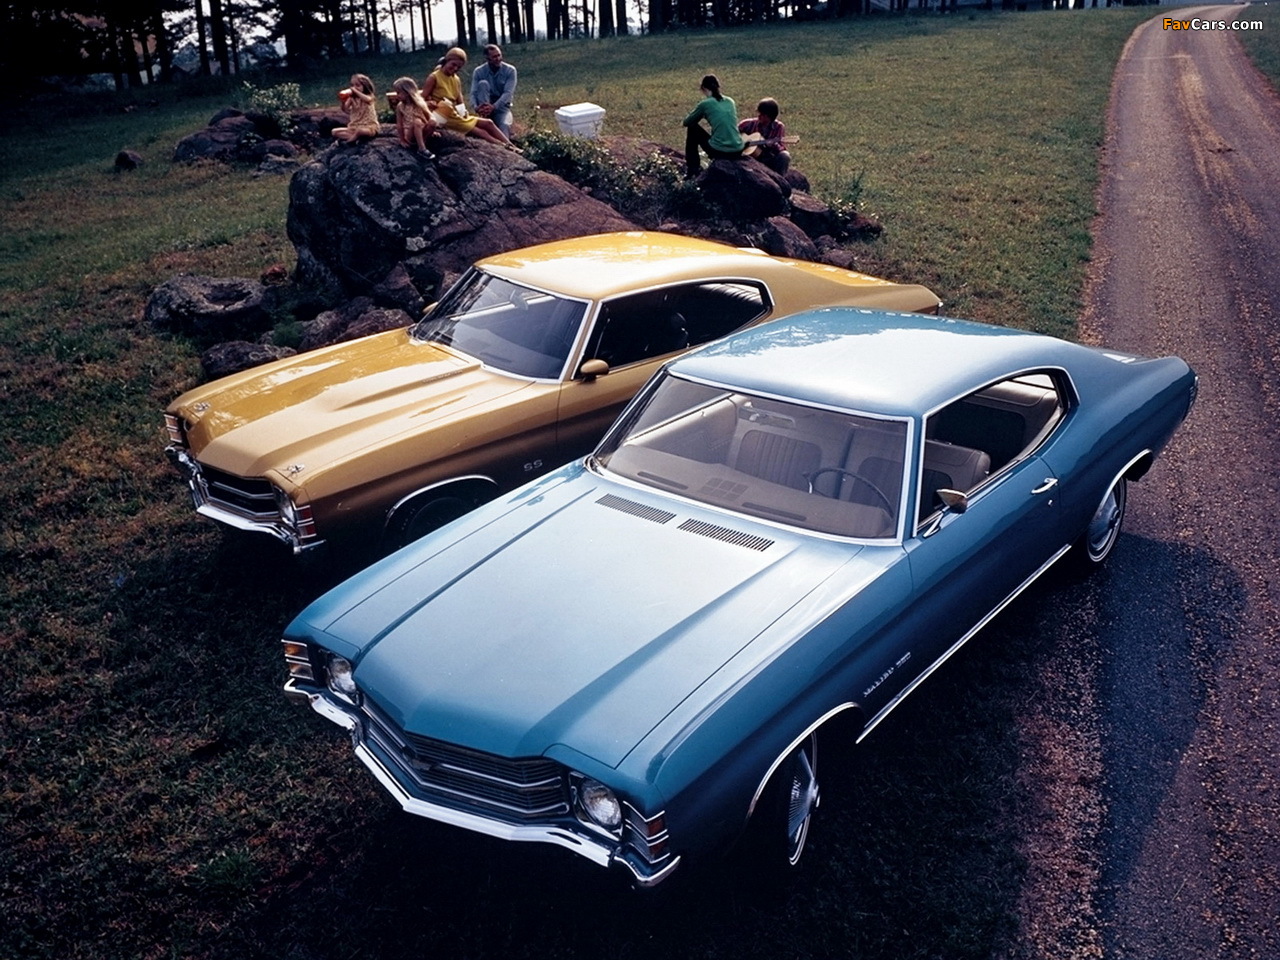 Chevrolet Chevelle Malibu 350 Hardtop Coupe & Chevelle SS 454 Hardtop Coupe 1971 images (1280 x 960)